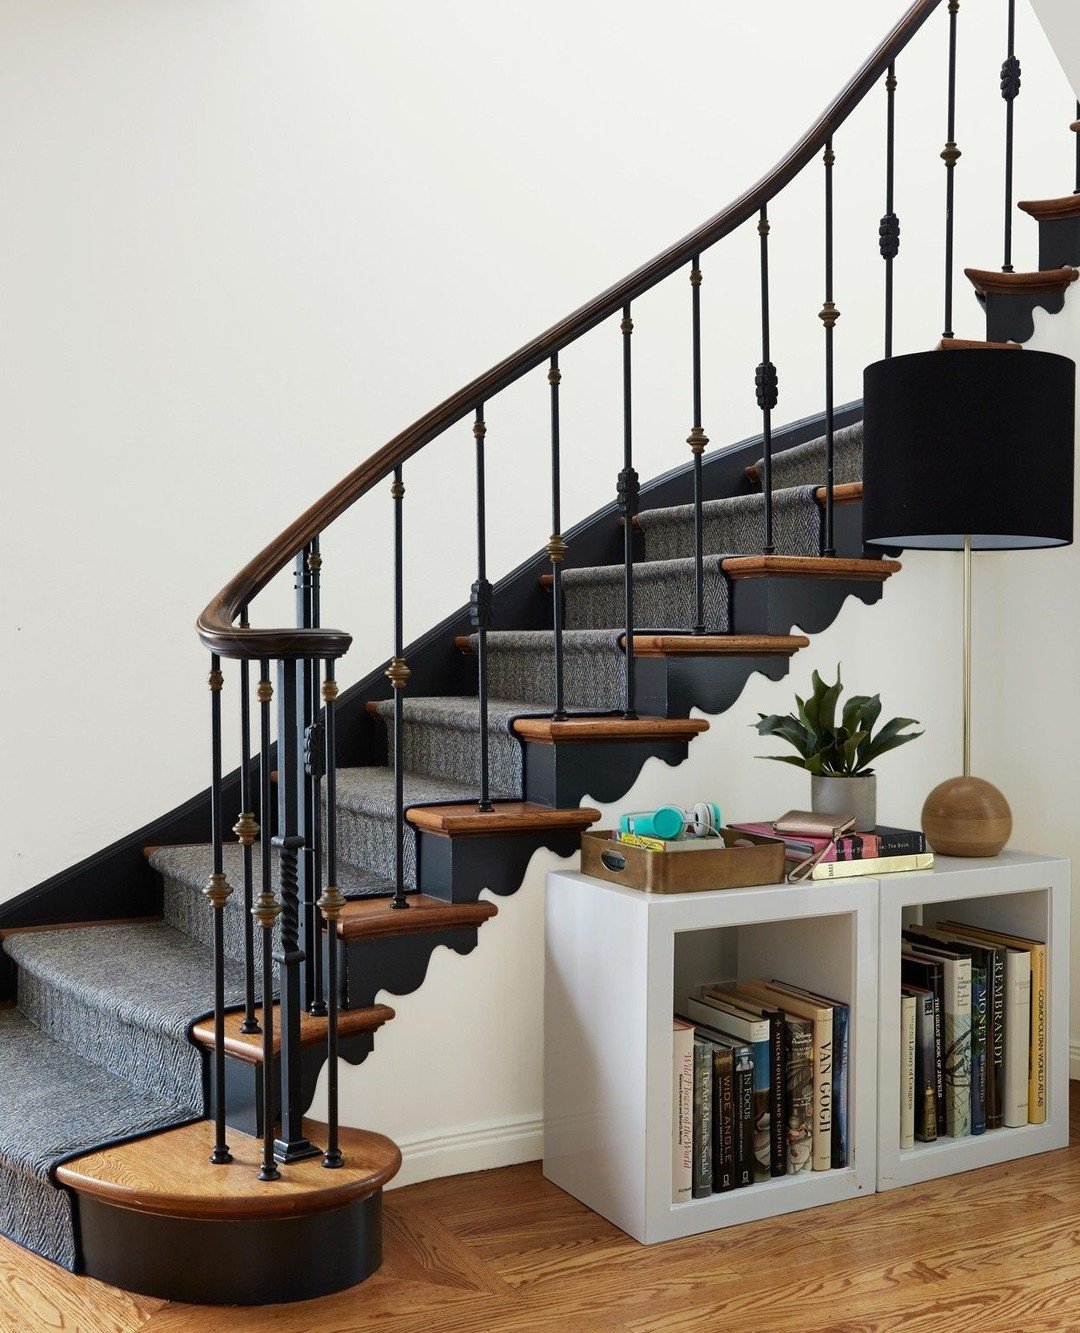 Painting the stair risers and baseboards in this San Francisco Edwardian highlighted the lyrical curves of the trim bringing new life to the stairway. Incorporating charcoal black paint into your home adds depth and highlights key architectural eleme